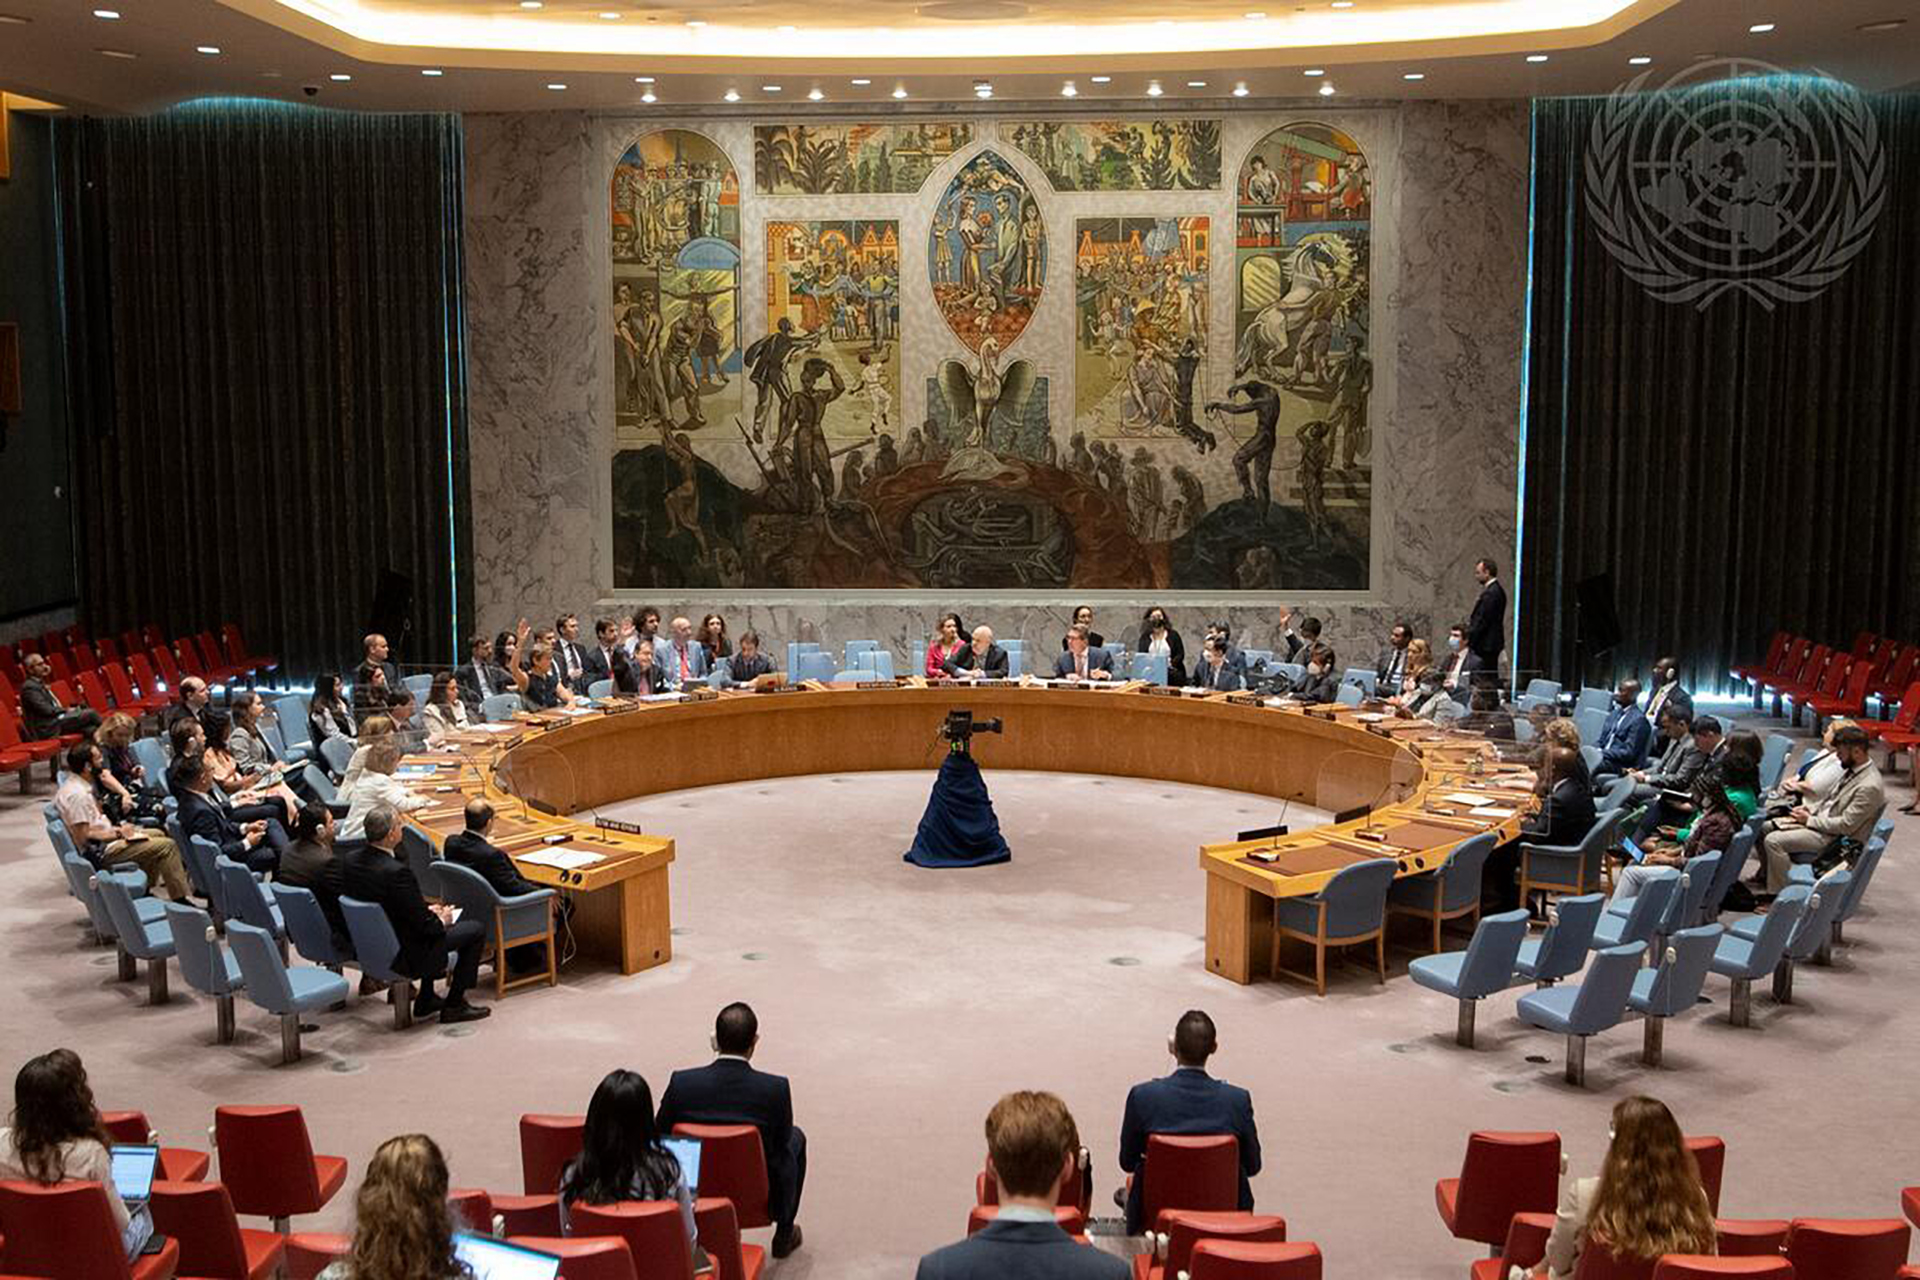 A view of UN Security Council members voting in favor of the resolution to extend resolution 2642 (2022) for six months. The photo is of the voting chamber. All council members are arranged in an open circle.